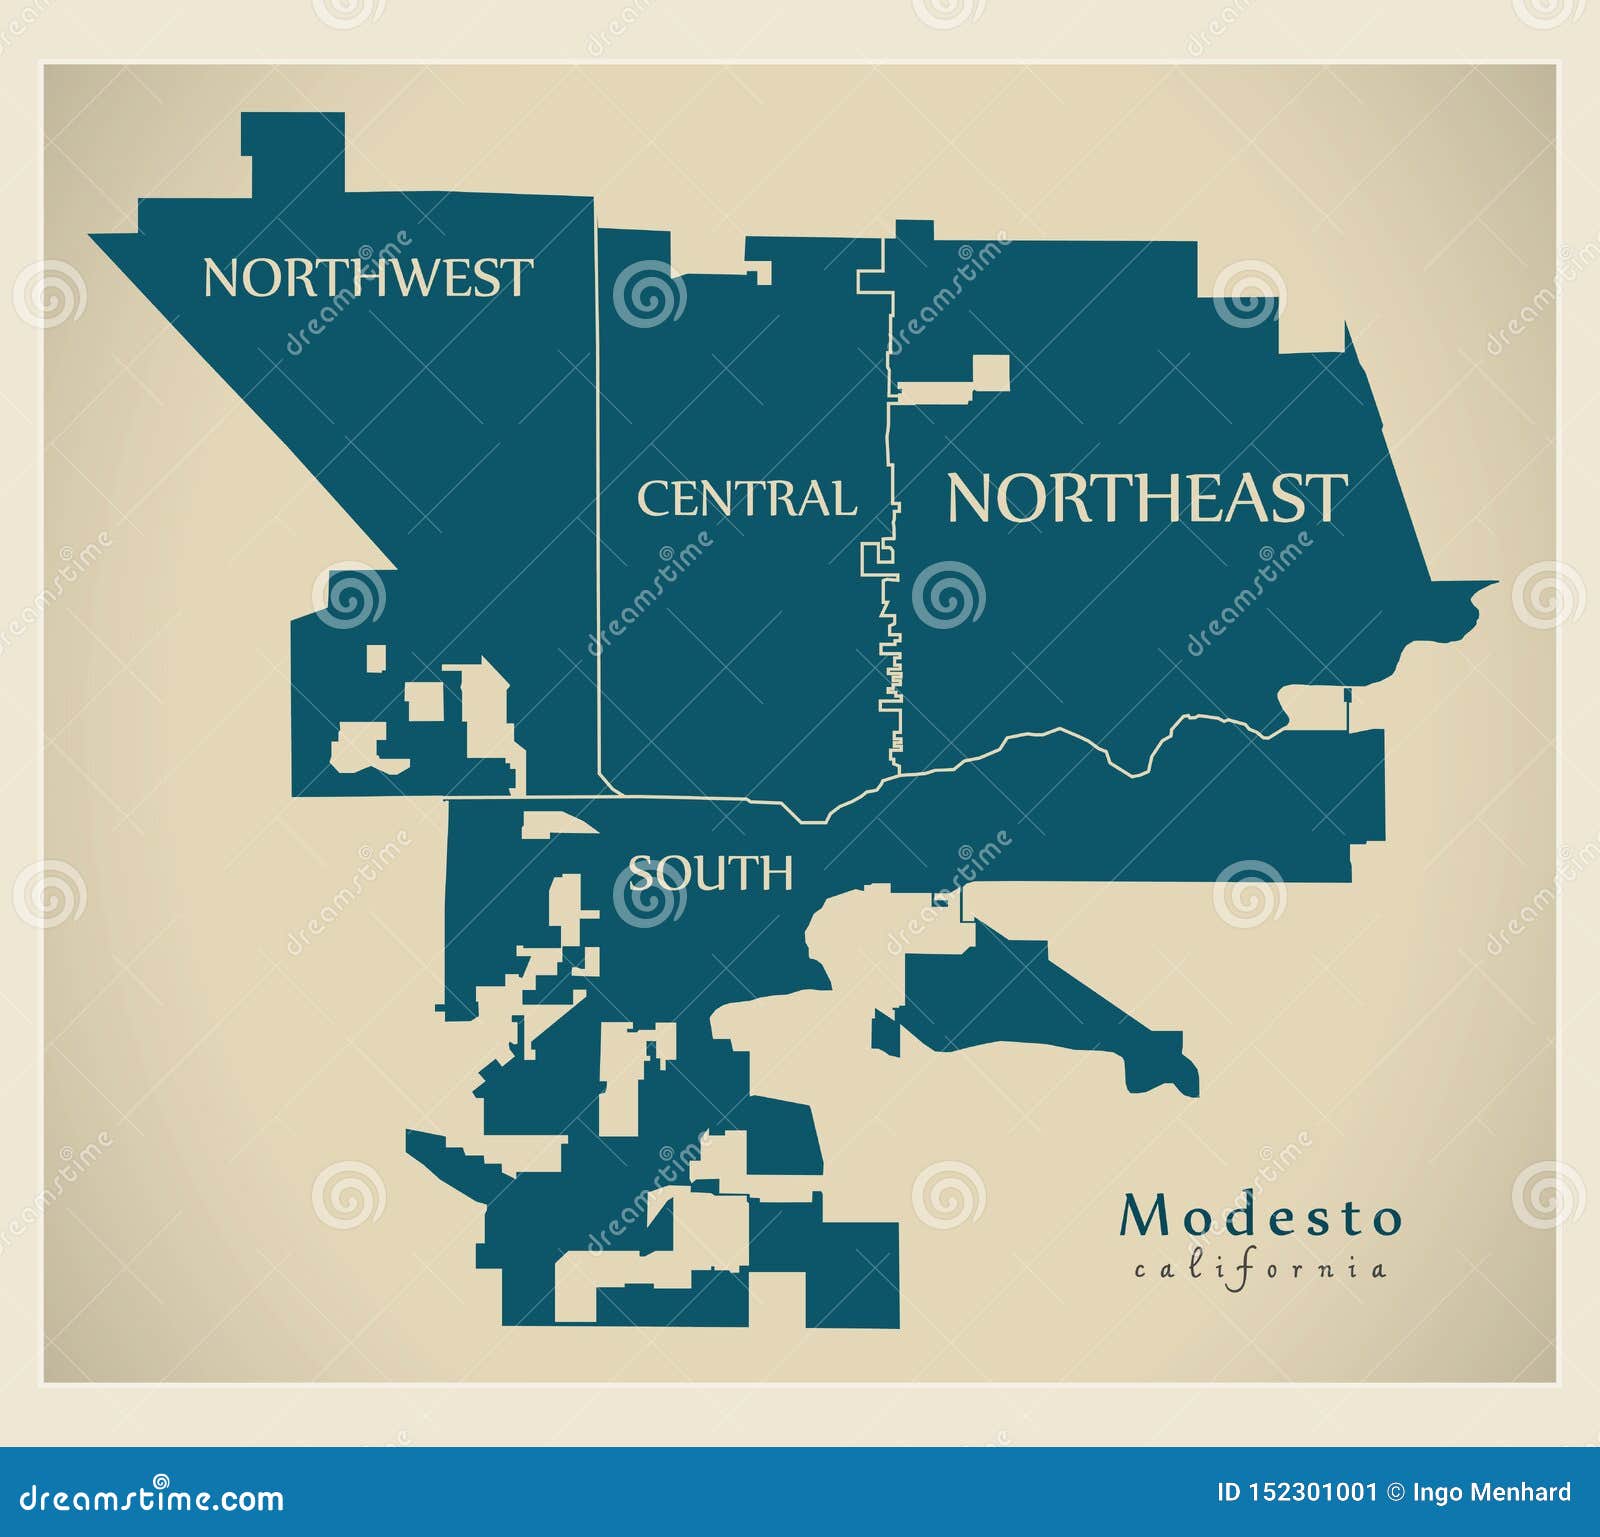 modern city map - modesto california city of the usa with neighborhoods and titles